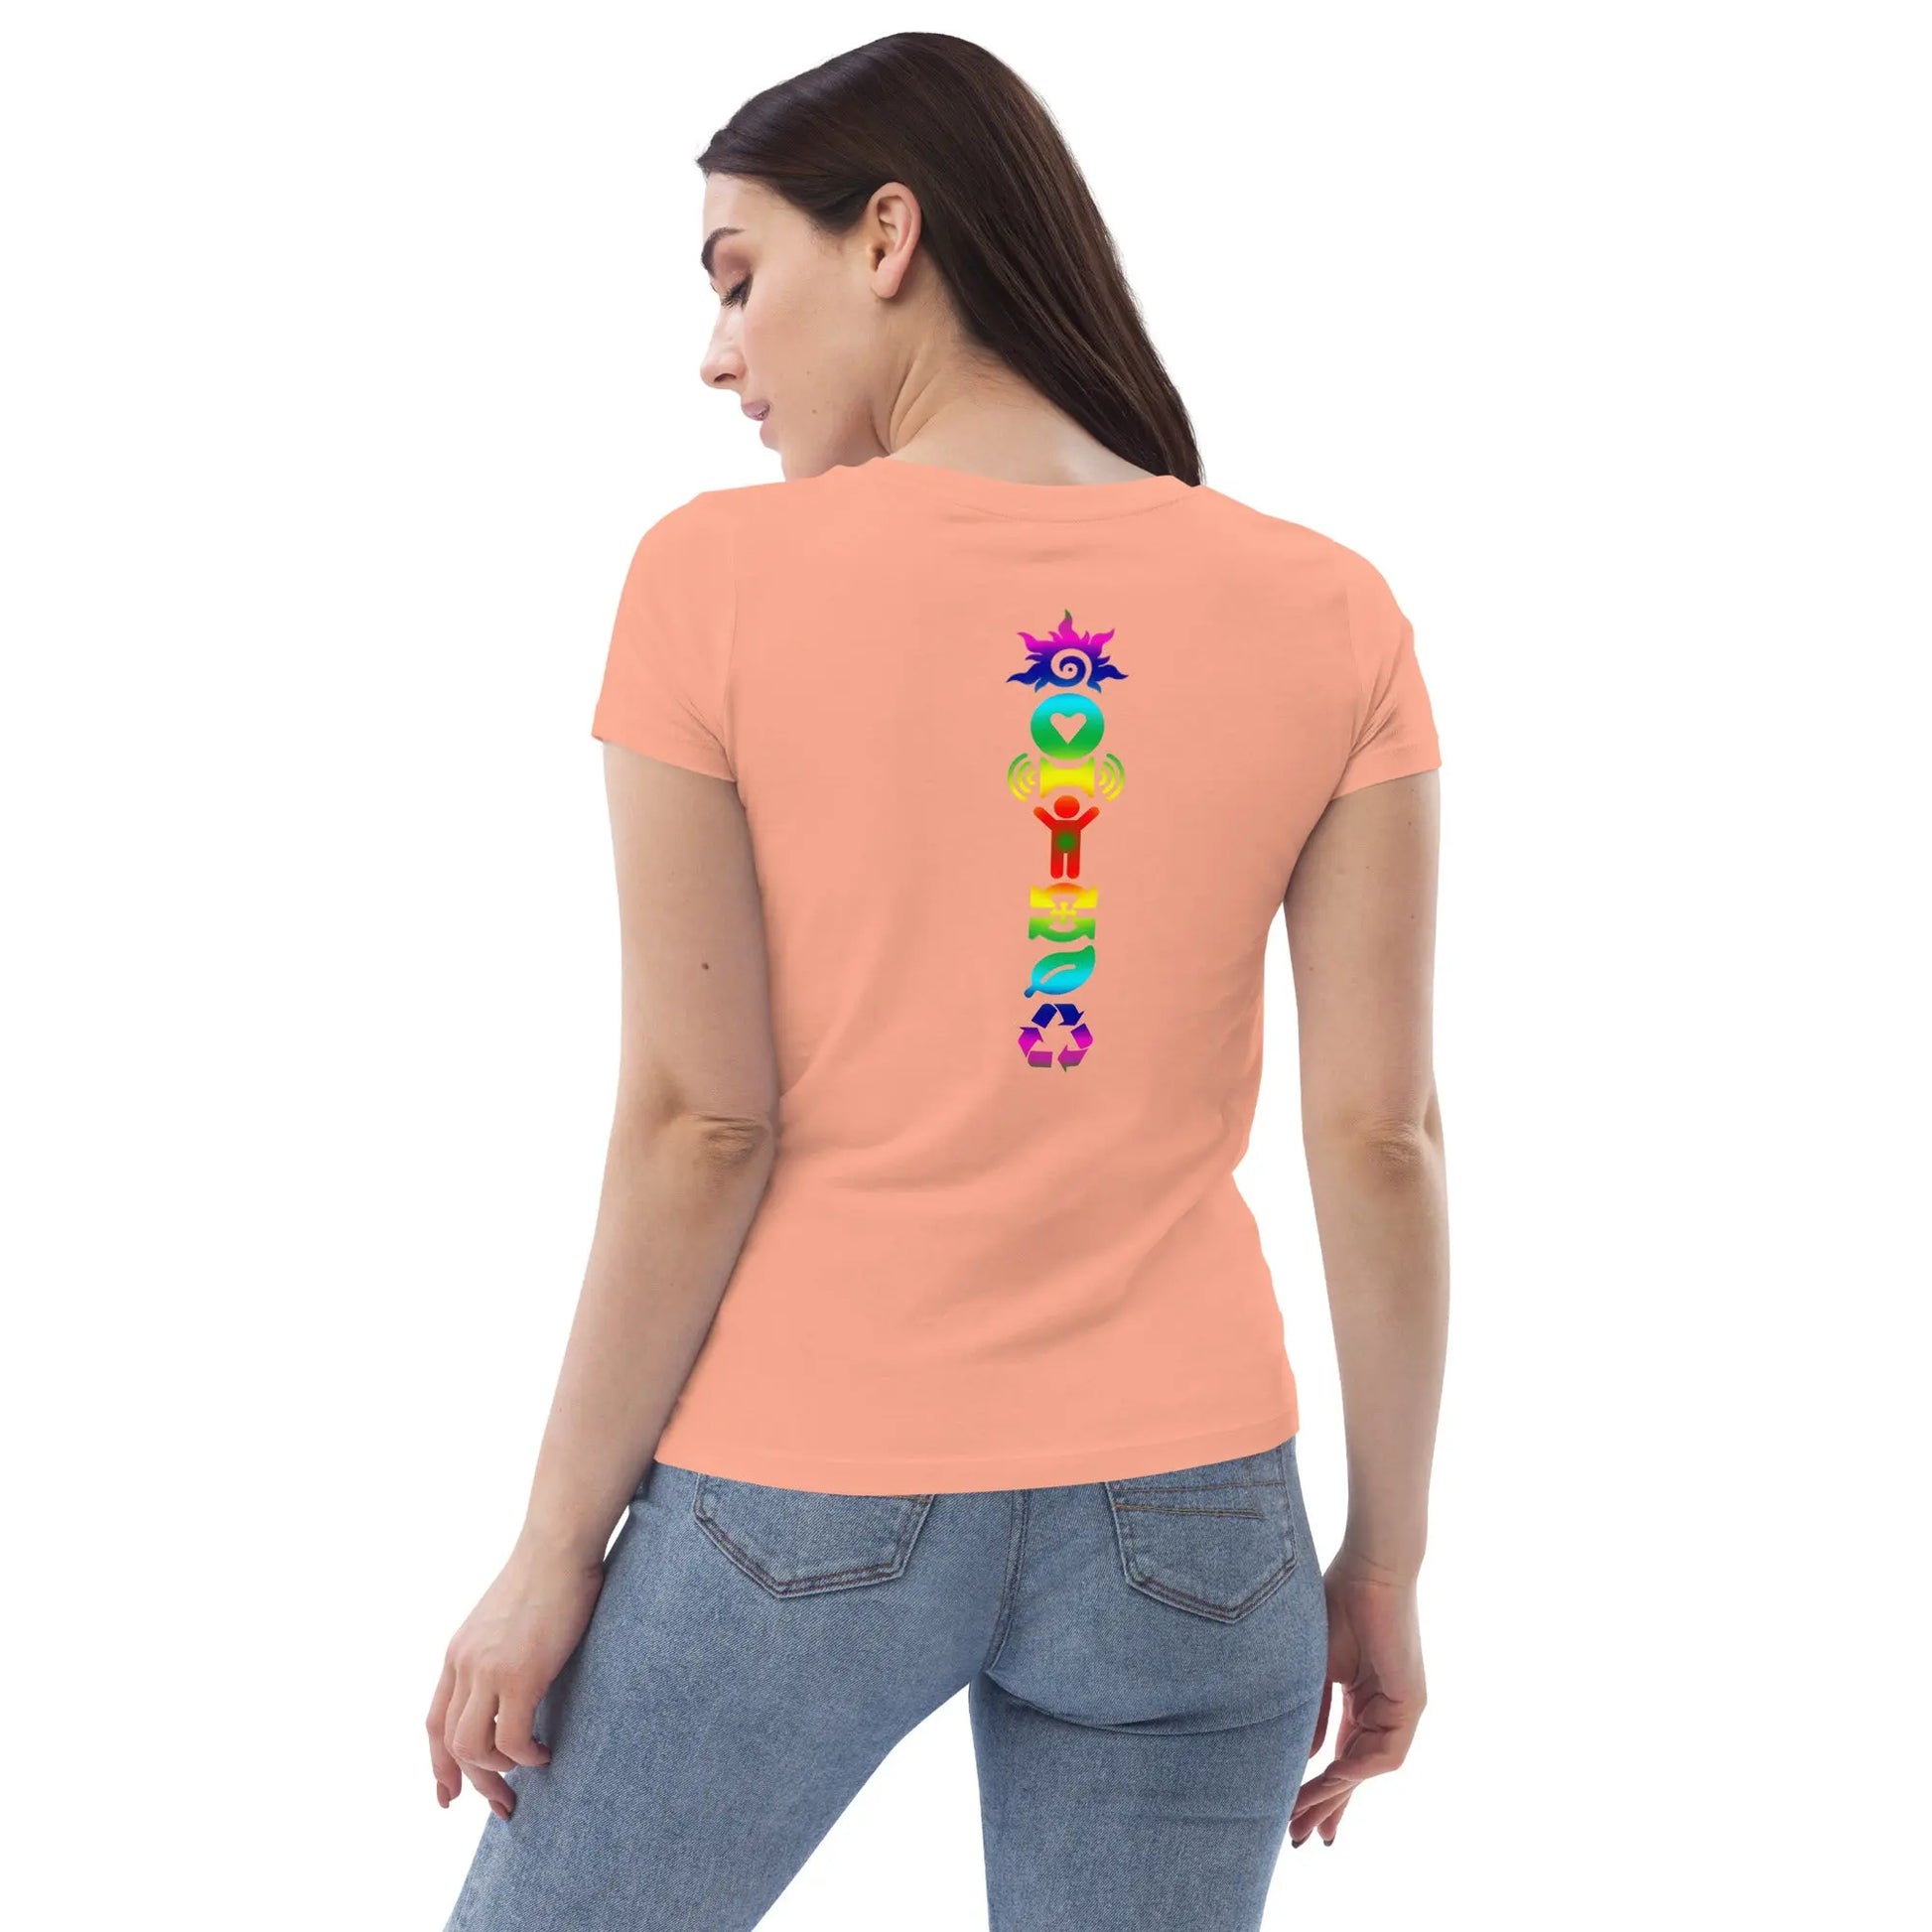 Women's fitted eco tee ActSunx - Image #12